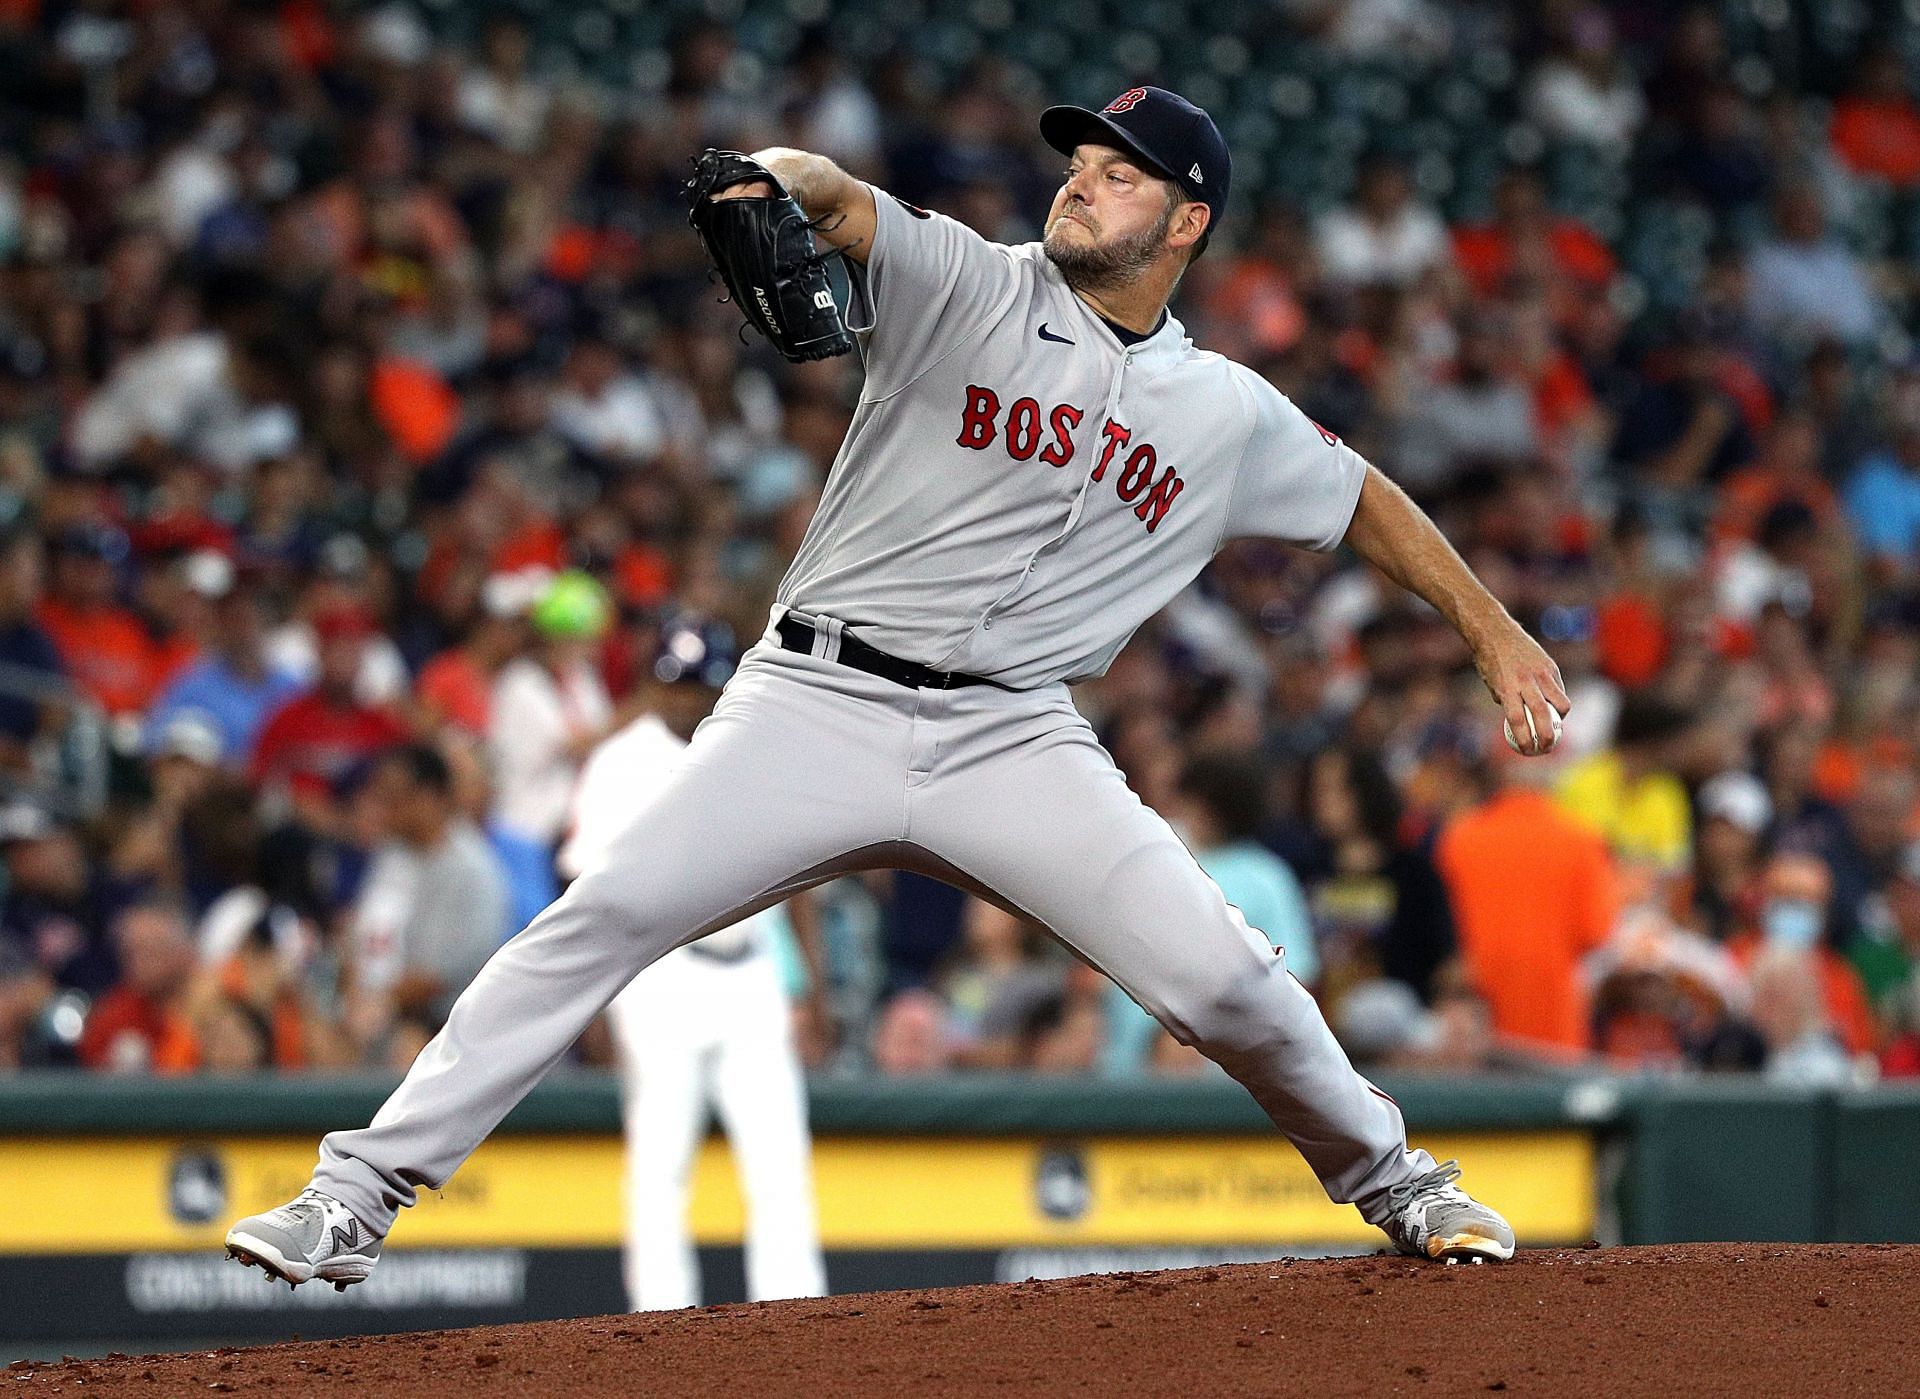 Rich Hill of the Boston Red Sox in a game versus the Houston Astros